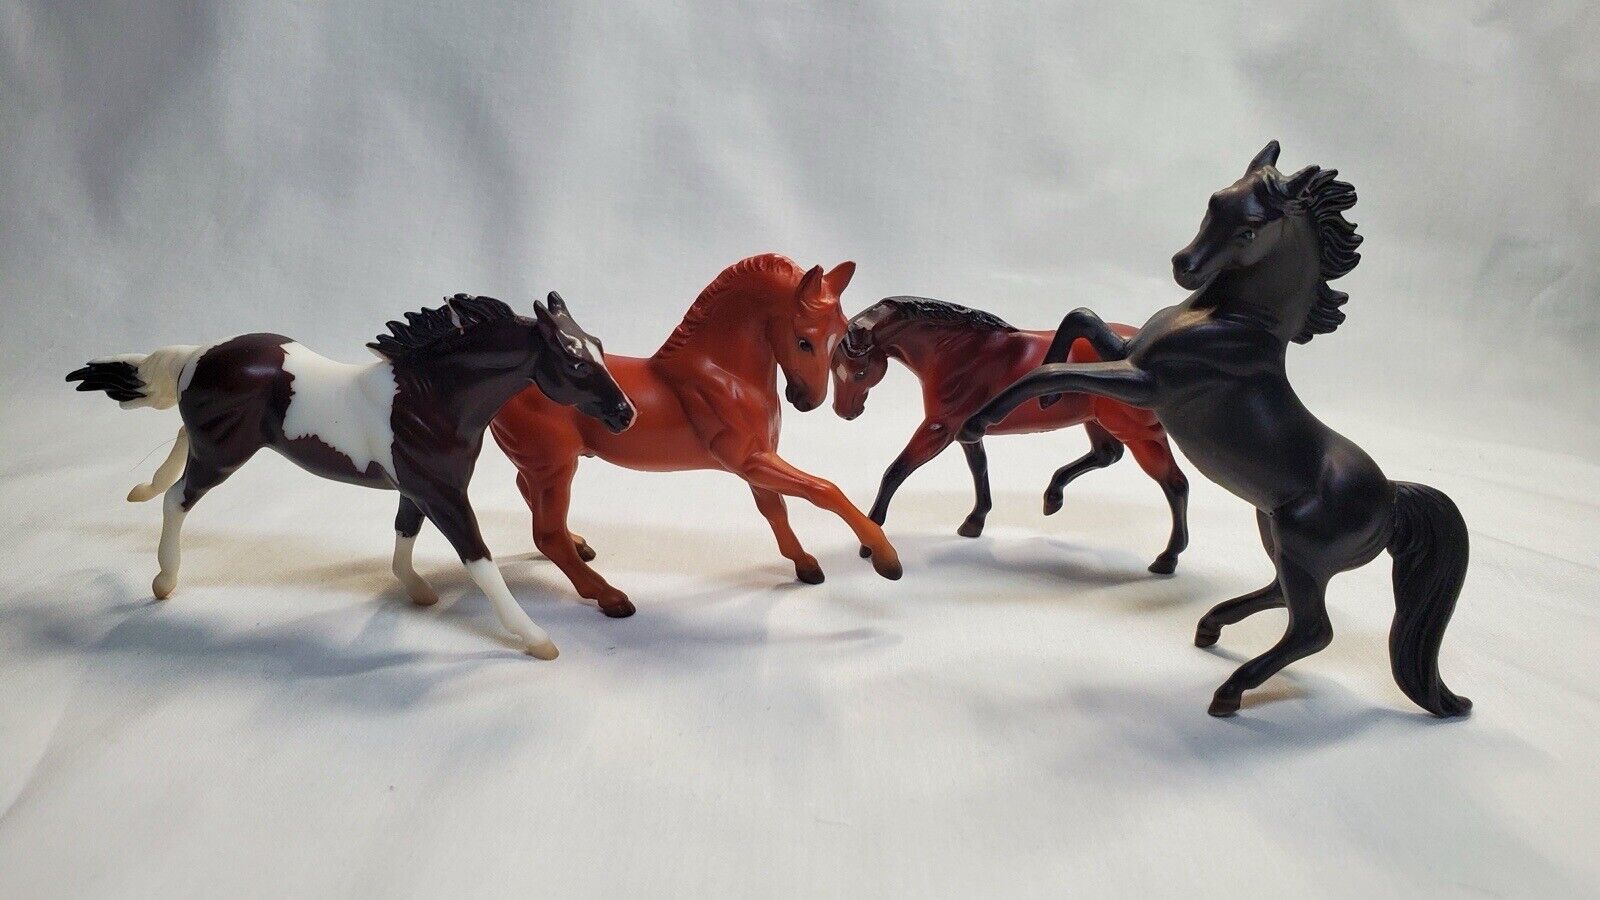 Breyer Stablemate 4-Horses Flicka in the Wild 2006 # 750010 Flicka and Family